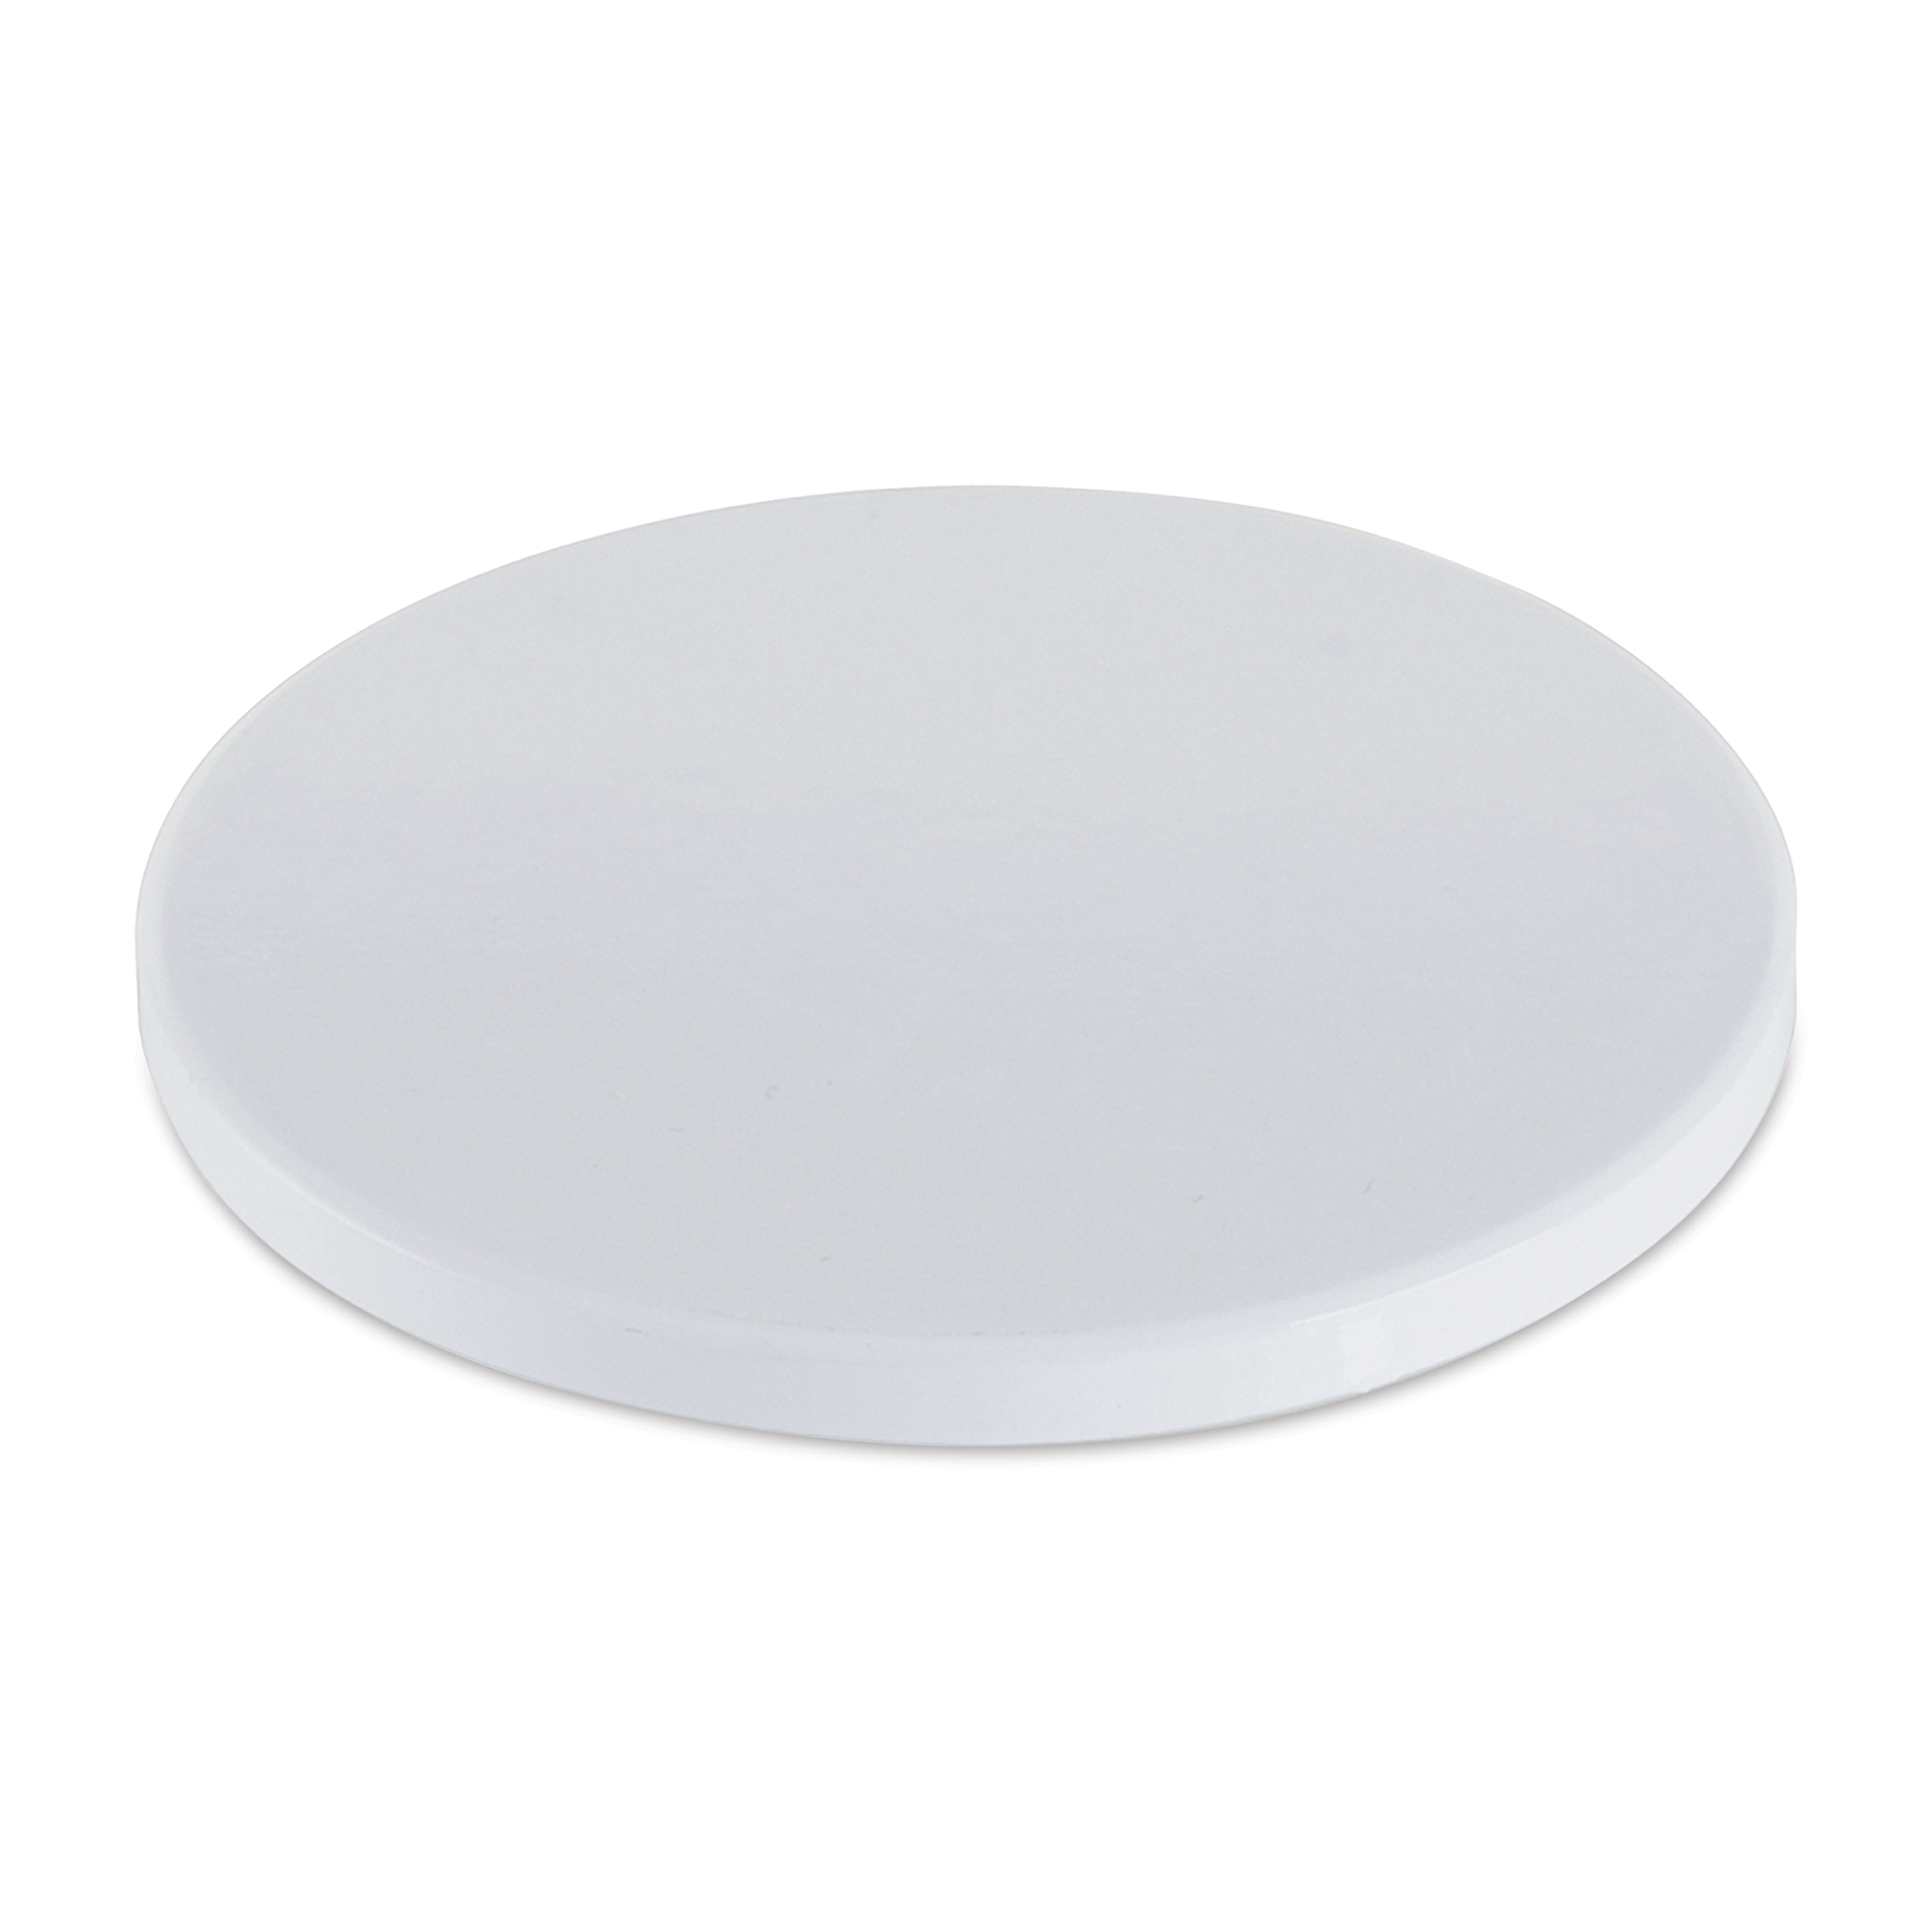 Craft Express 3 inch Sublimation Ceramic Coaster, 4 Pack - White